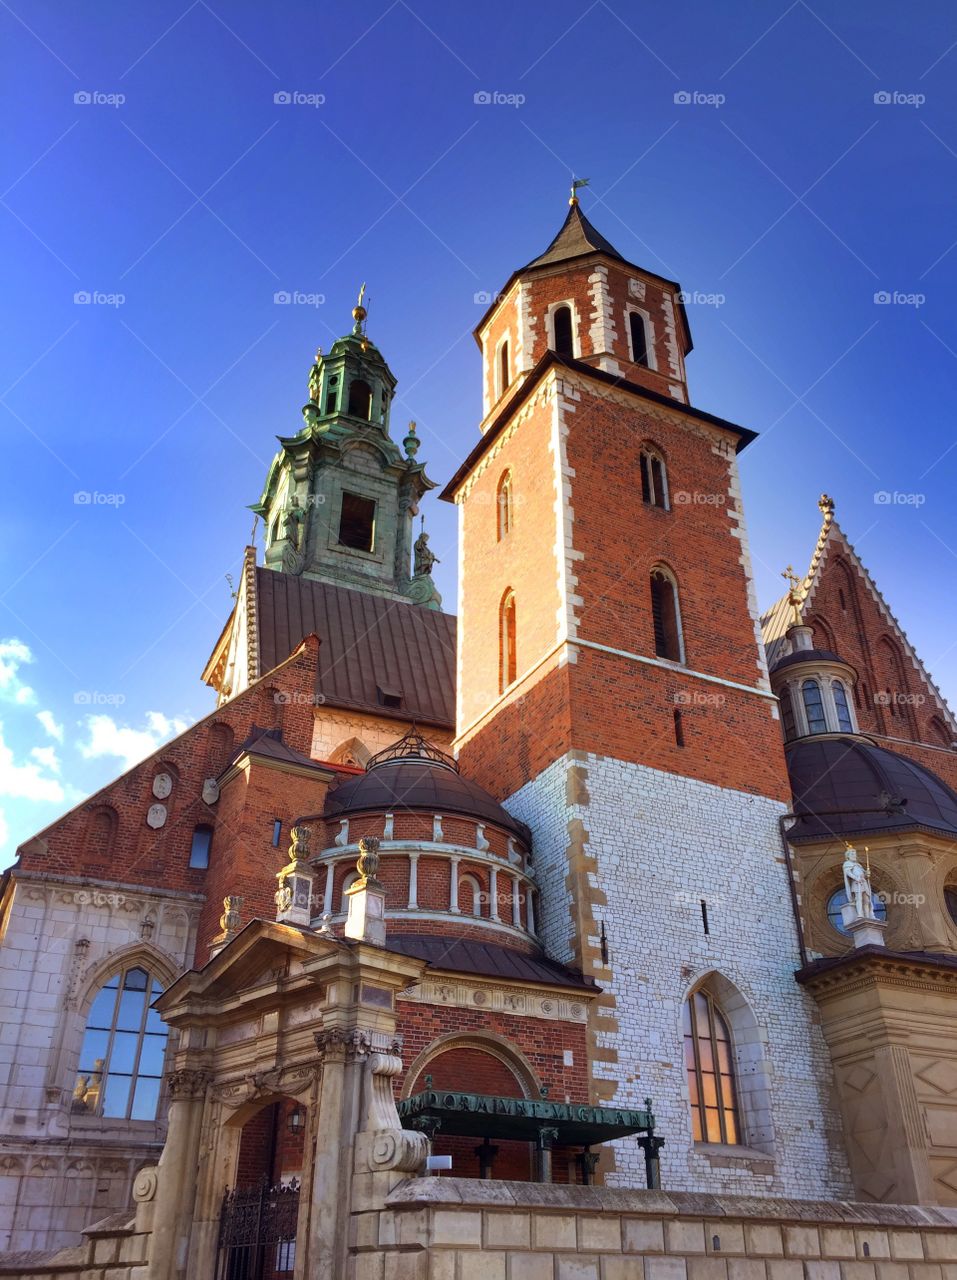 Wawel castle in Cracow Poland